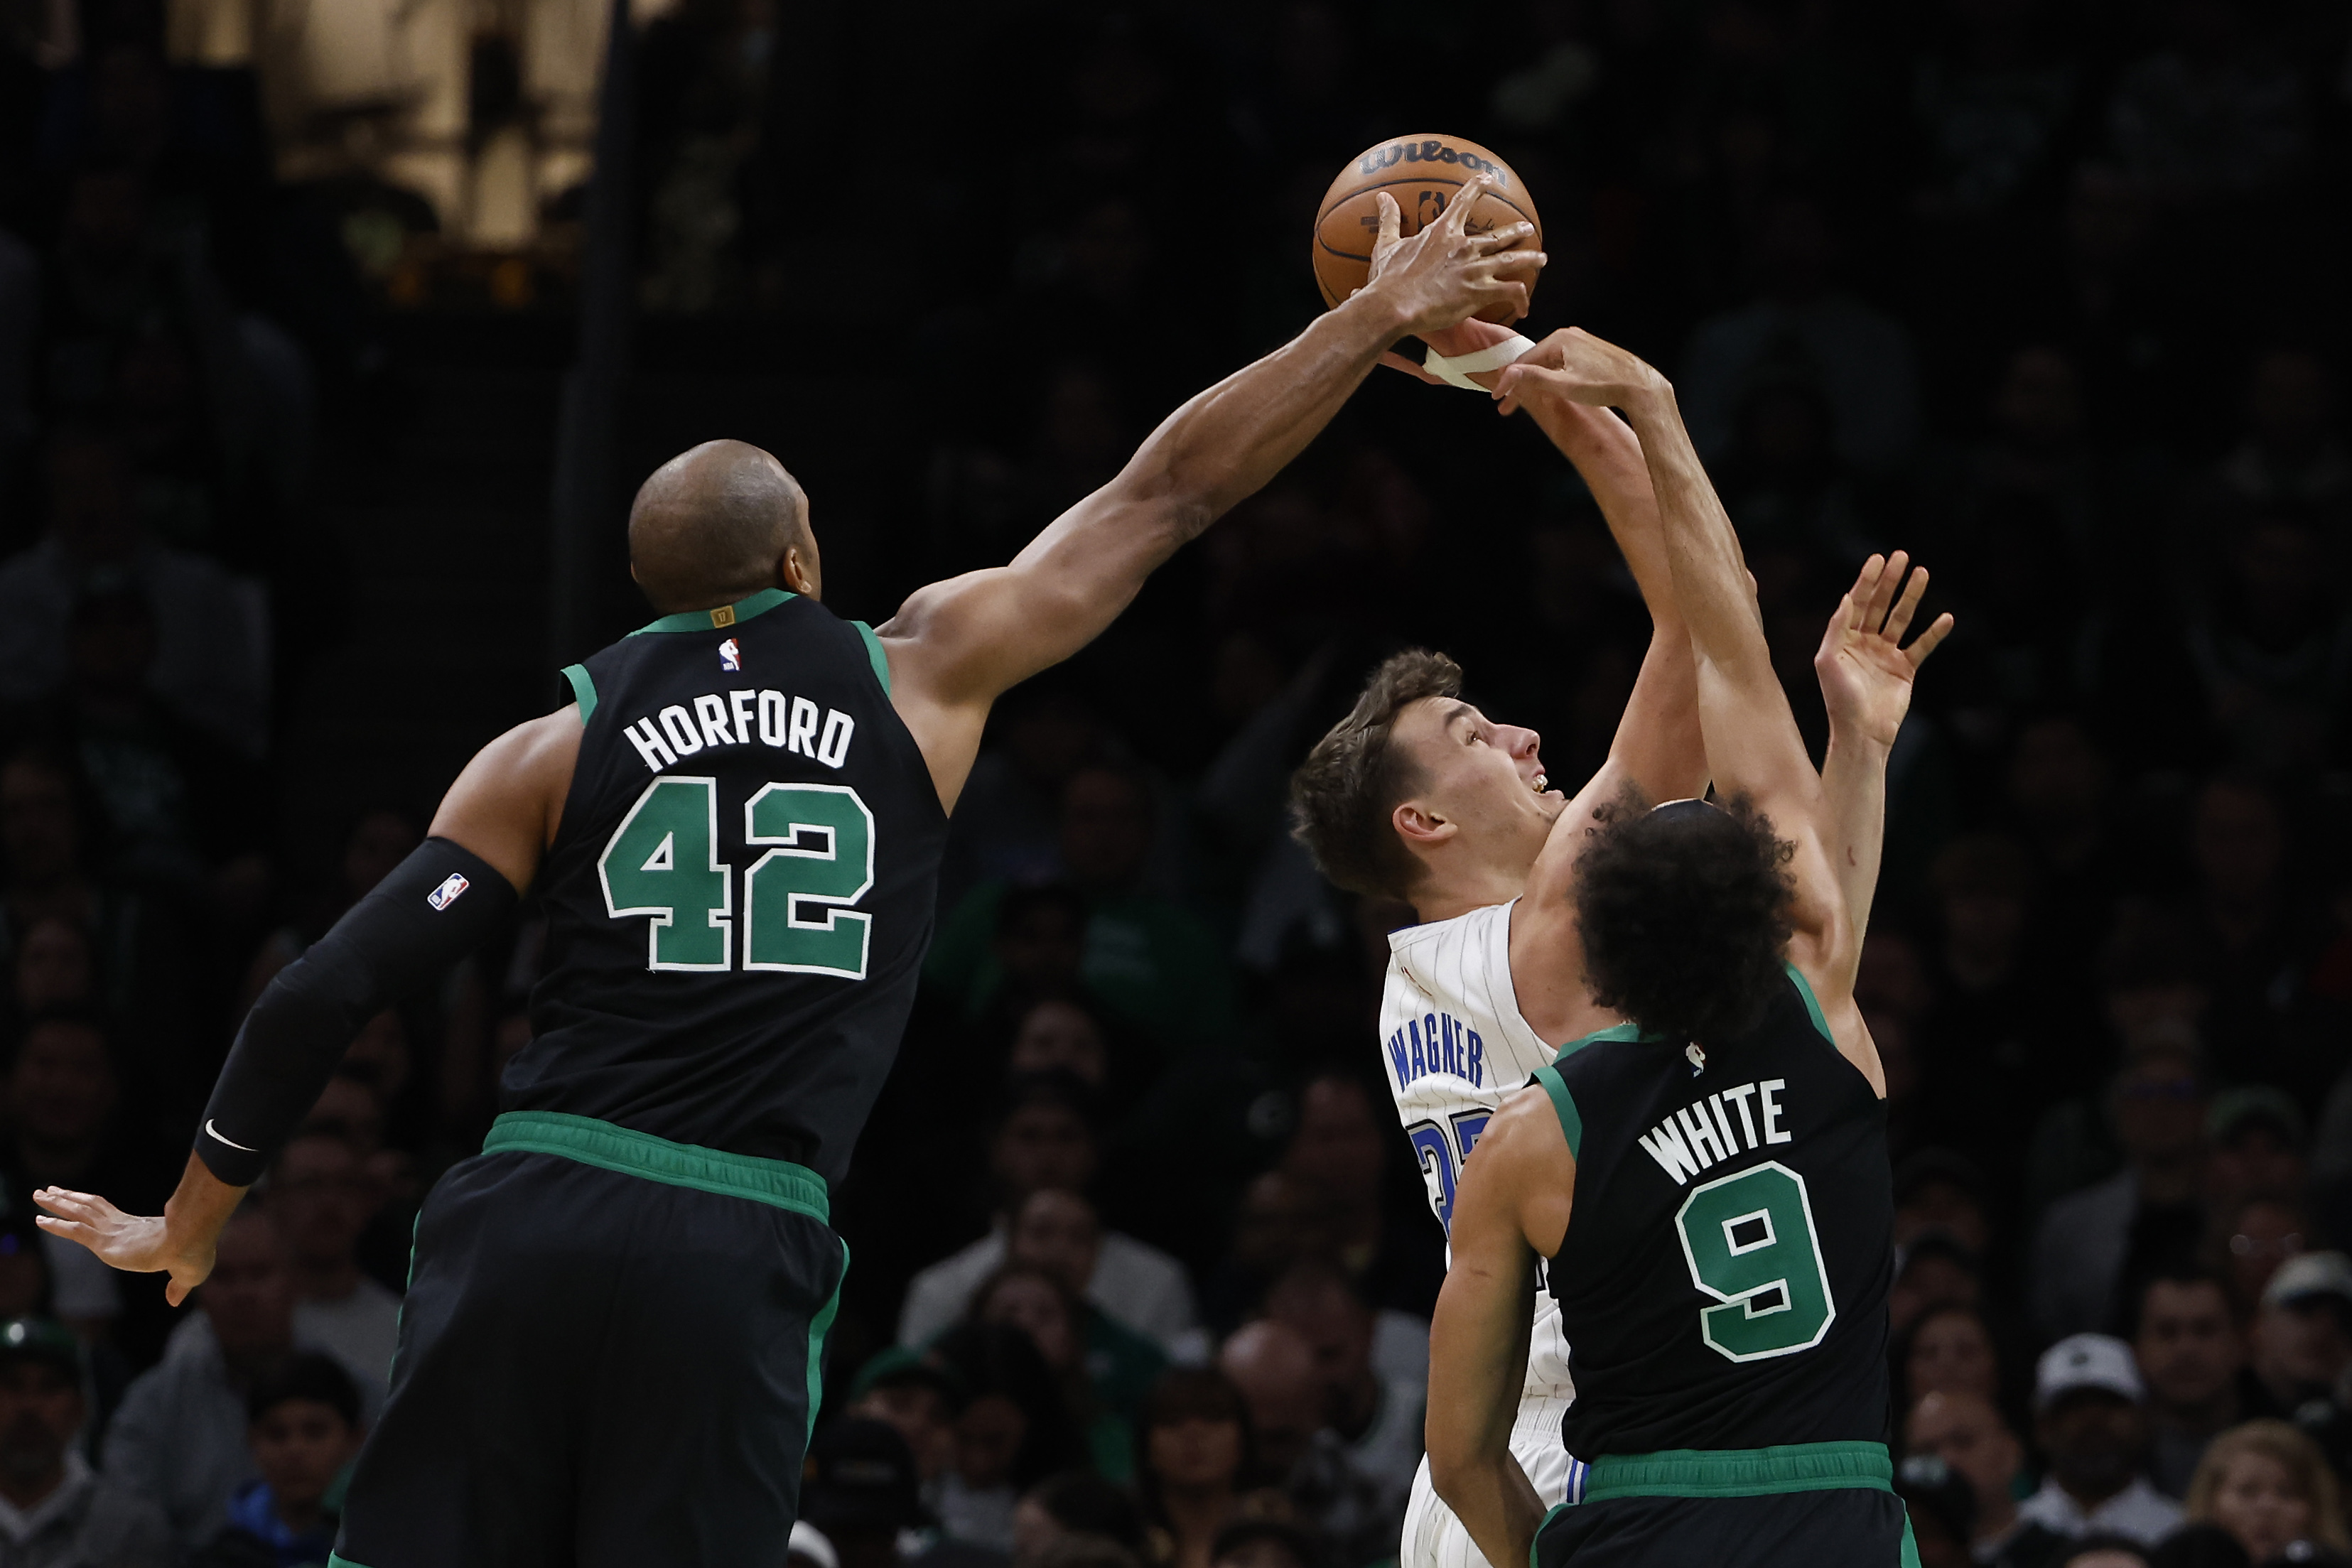 Al Horford of the Boston Celtics blocks a shot by Franz Wagner of the Orlando Magic.